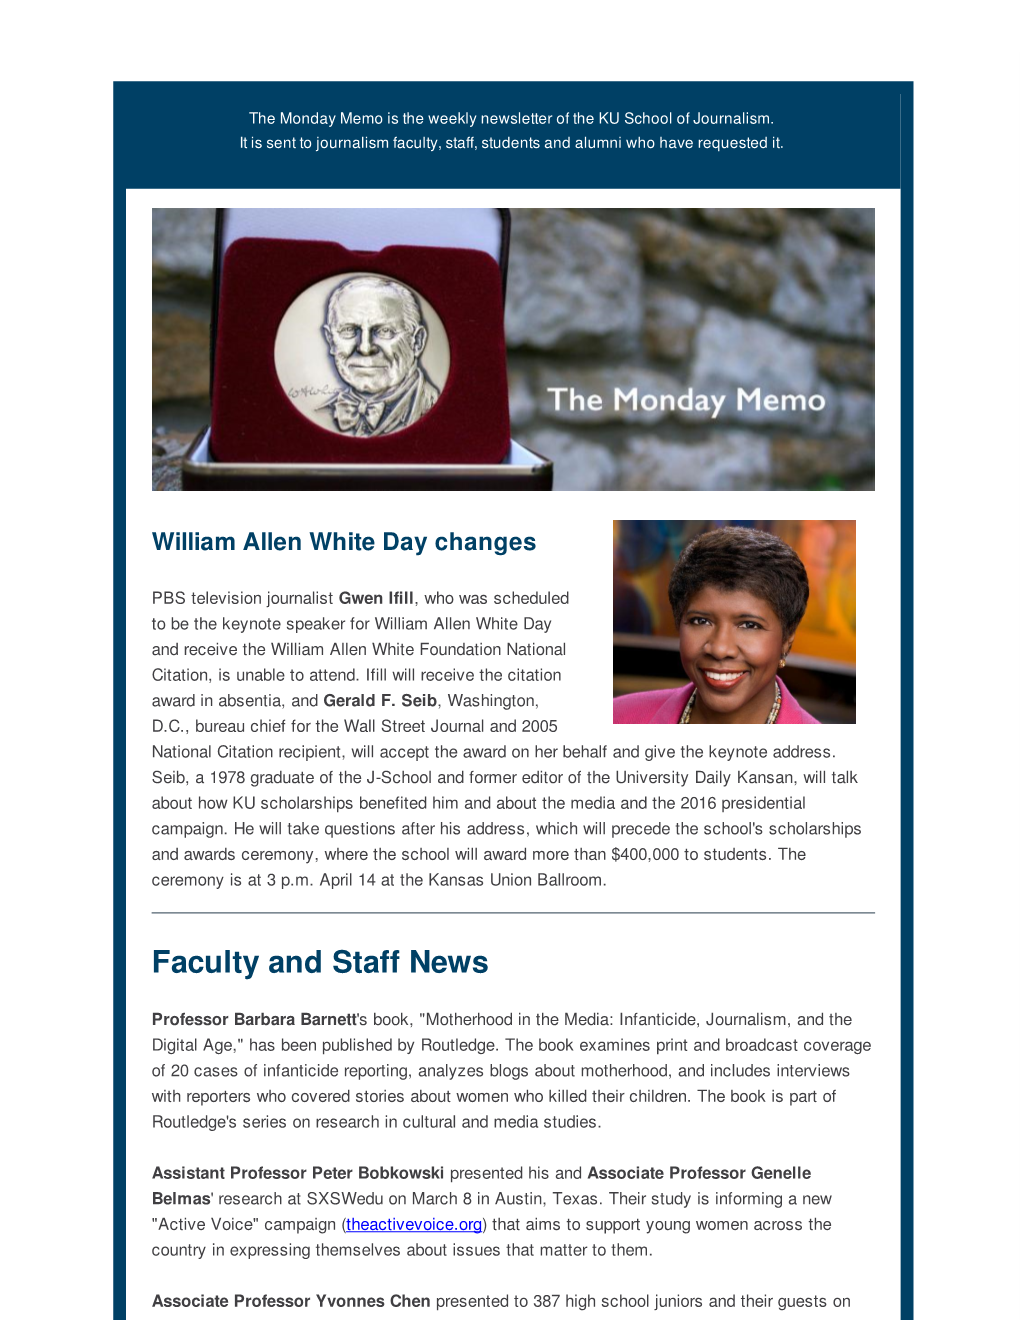 Faculty and Staff News